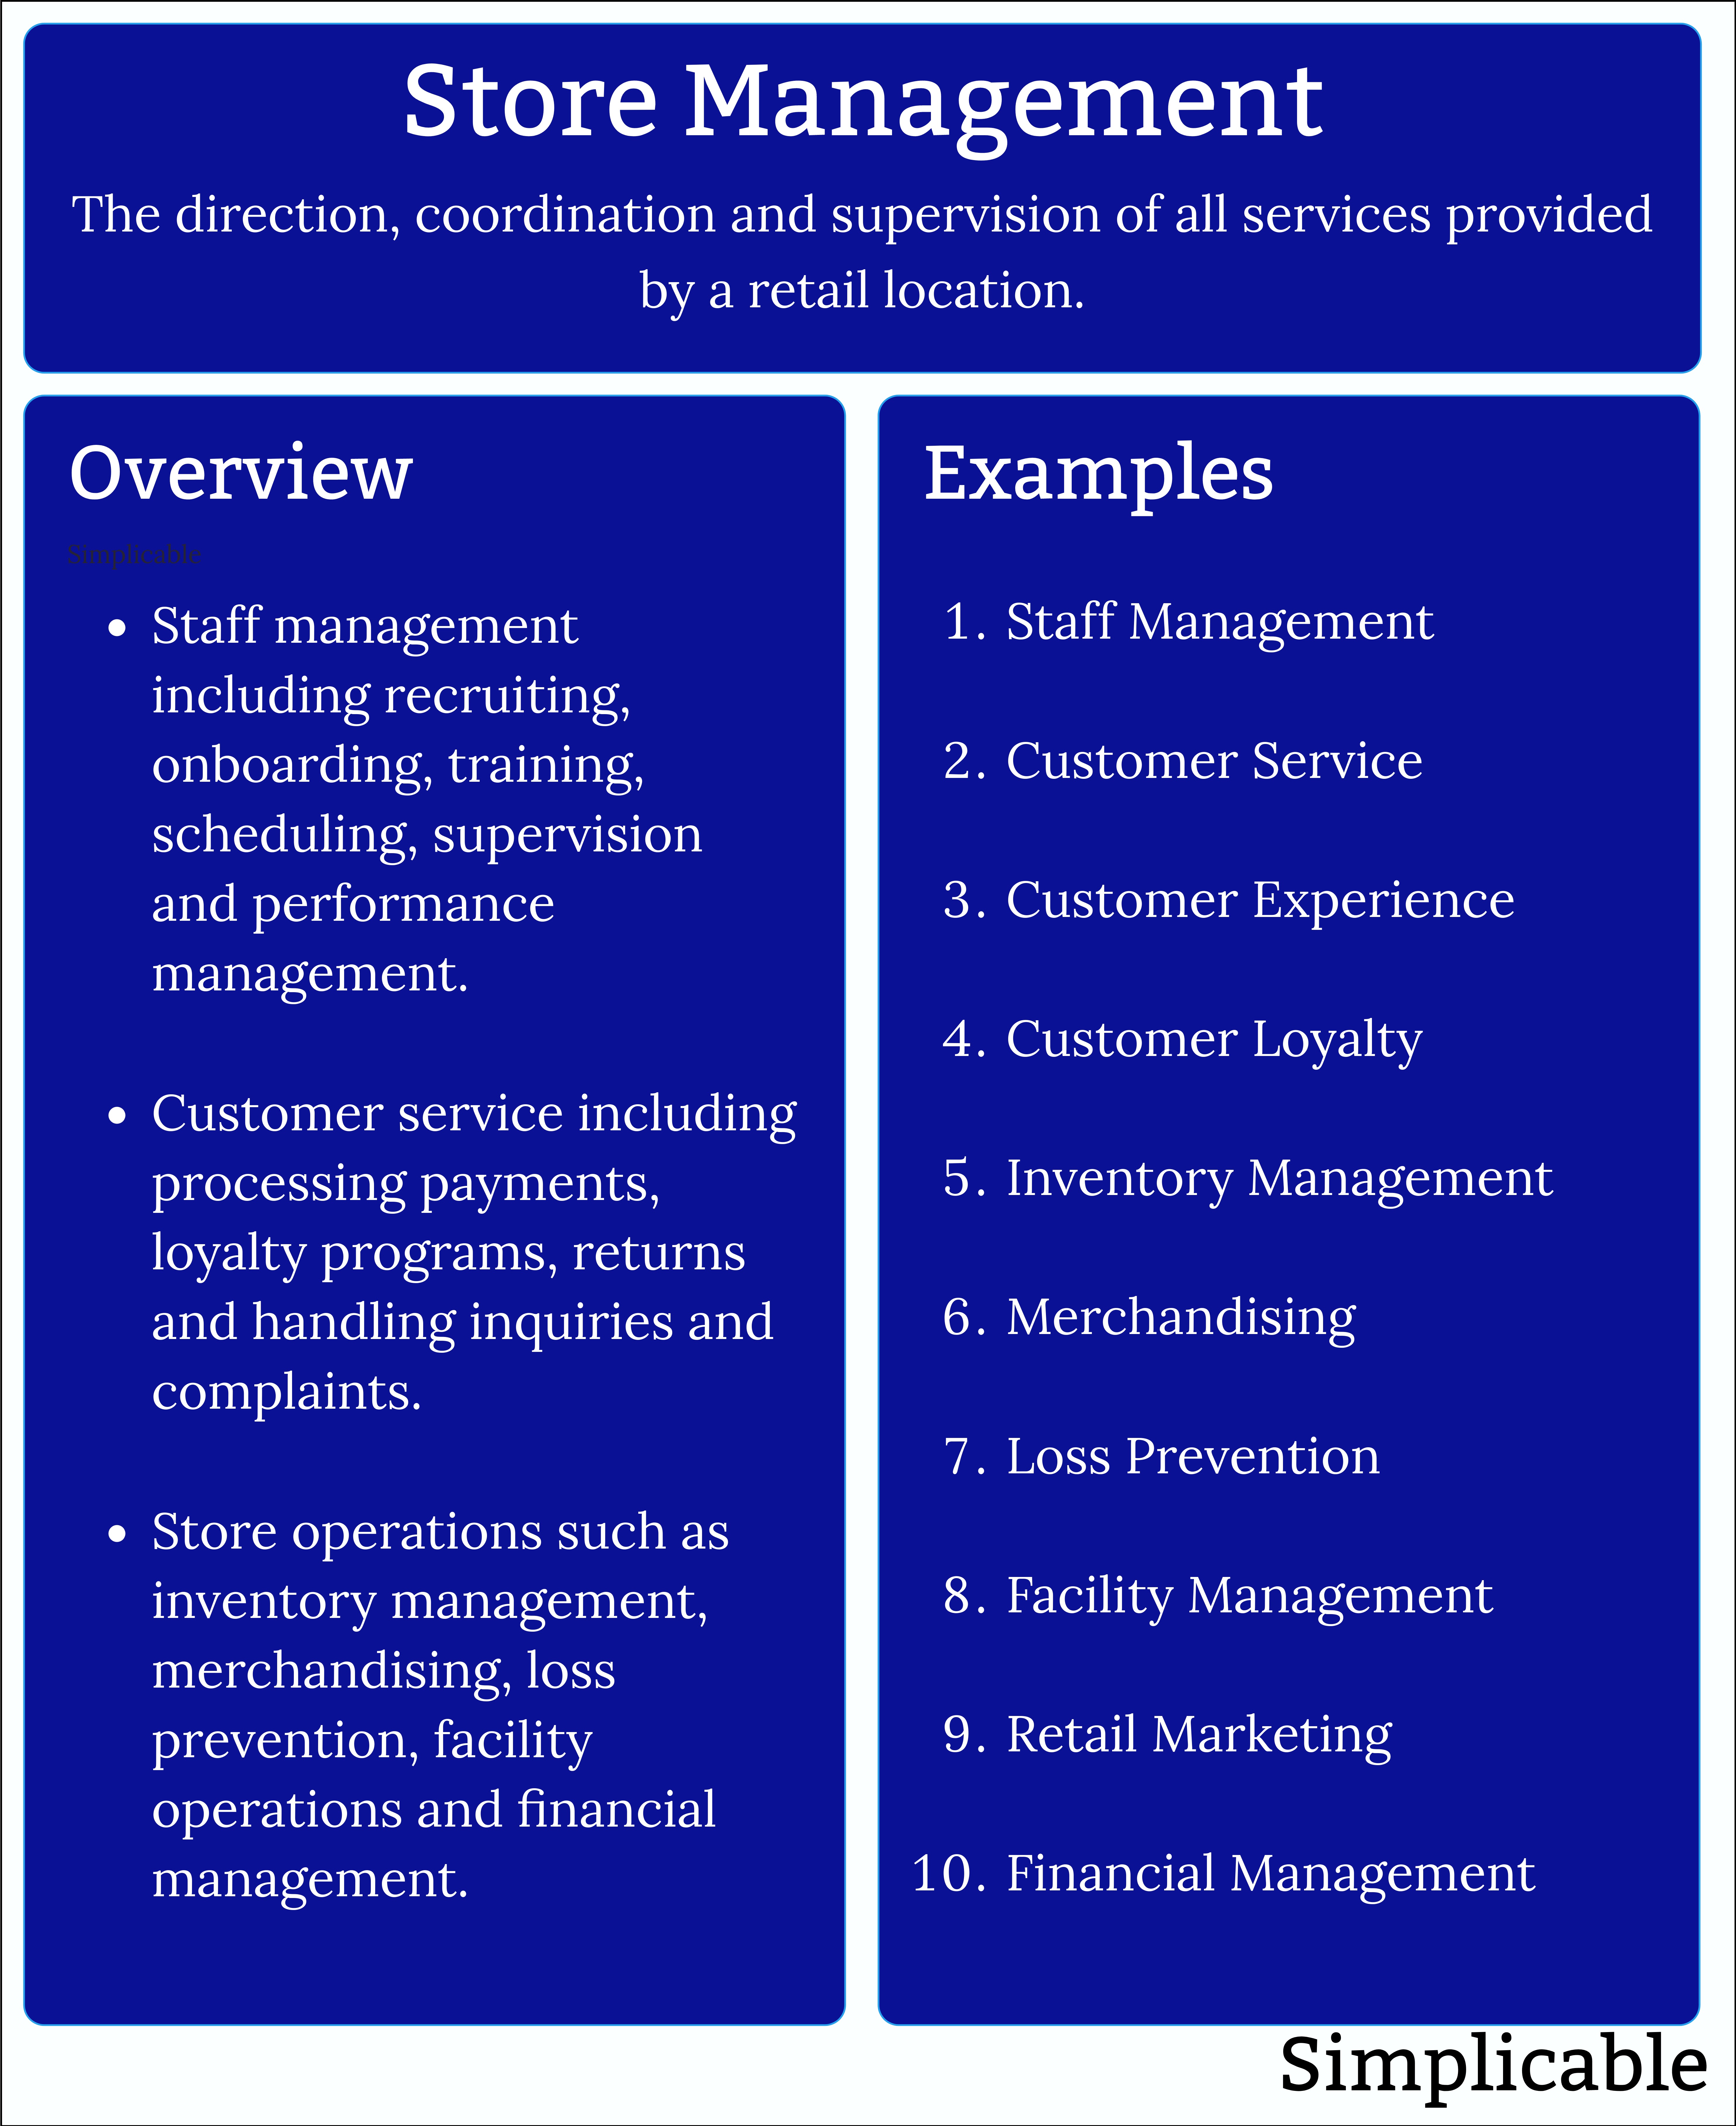 store management summary and examples